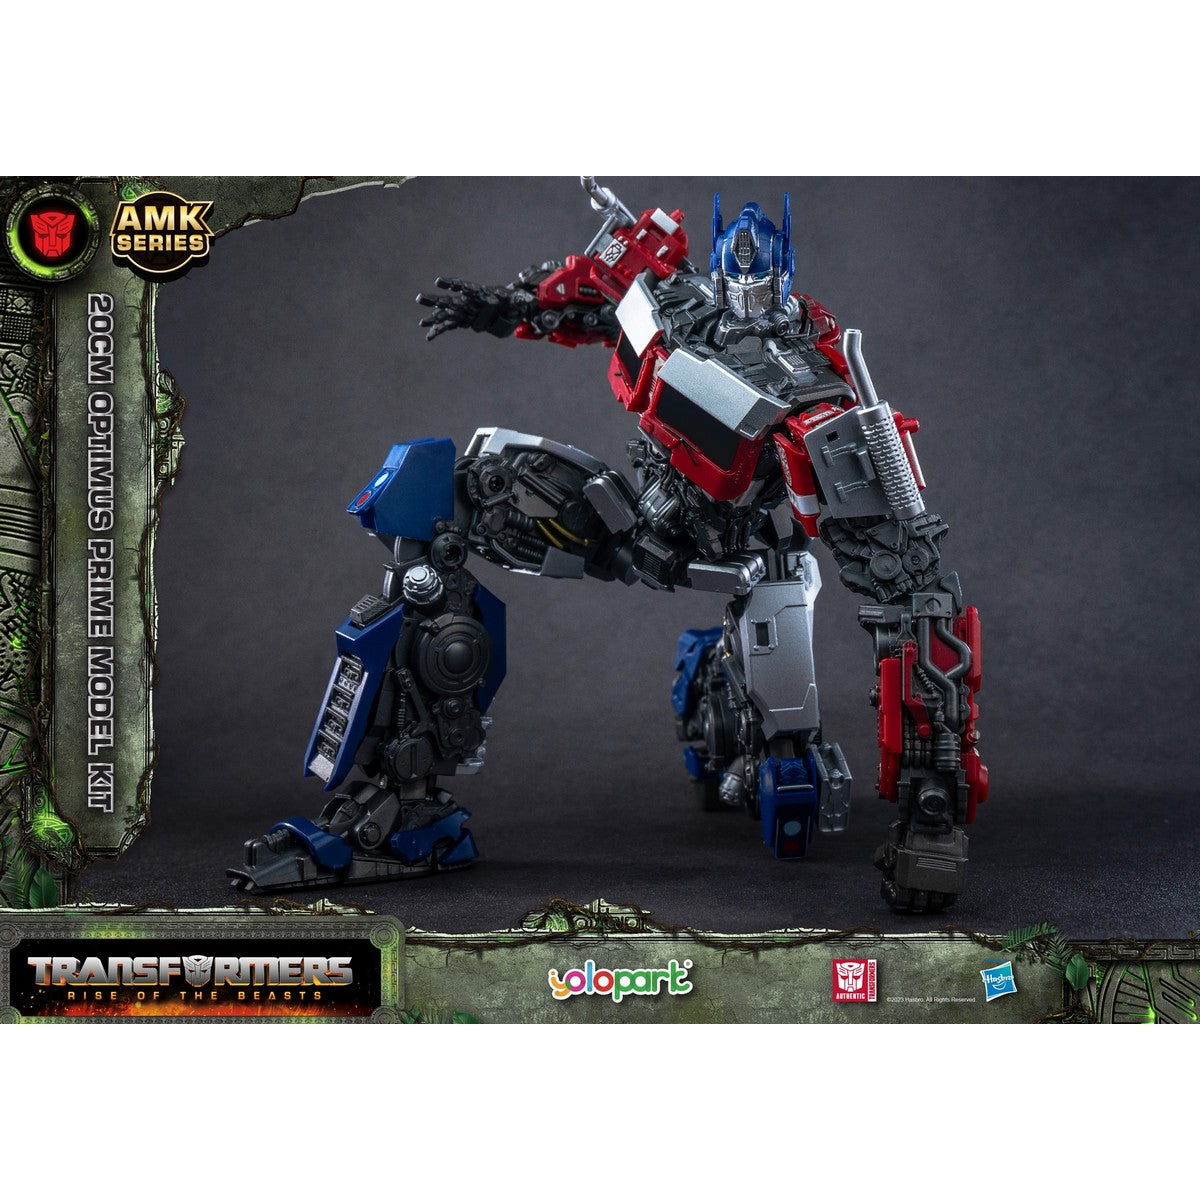 Transformers: Rise of the Beasts - 20cm Optimus Prime - AMK SERIES